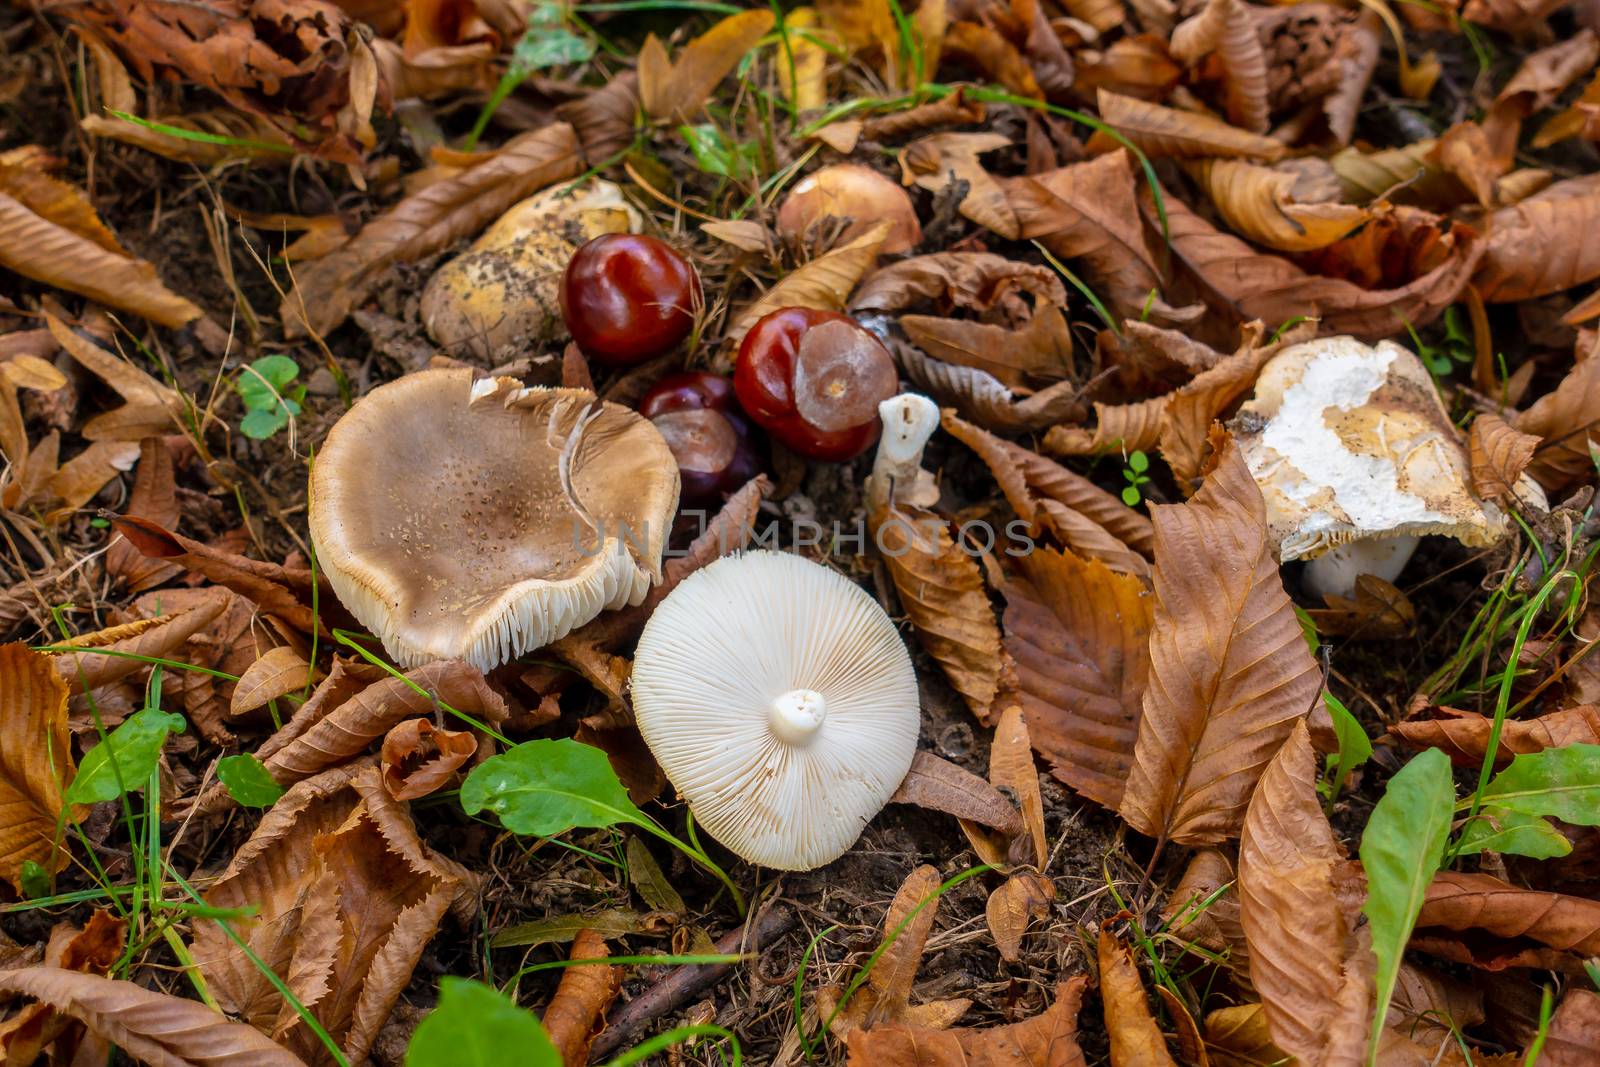 Mushrooms and Chestnuts on forest floor with foliage, grass moving in wind, one mushroom turned over on cap and gills are seen, static shot